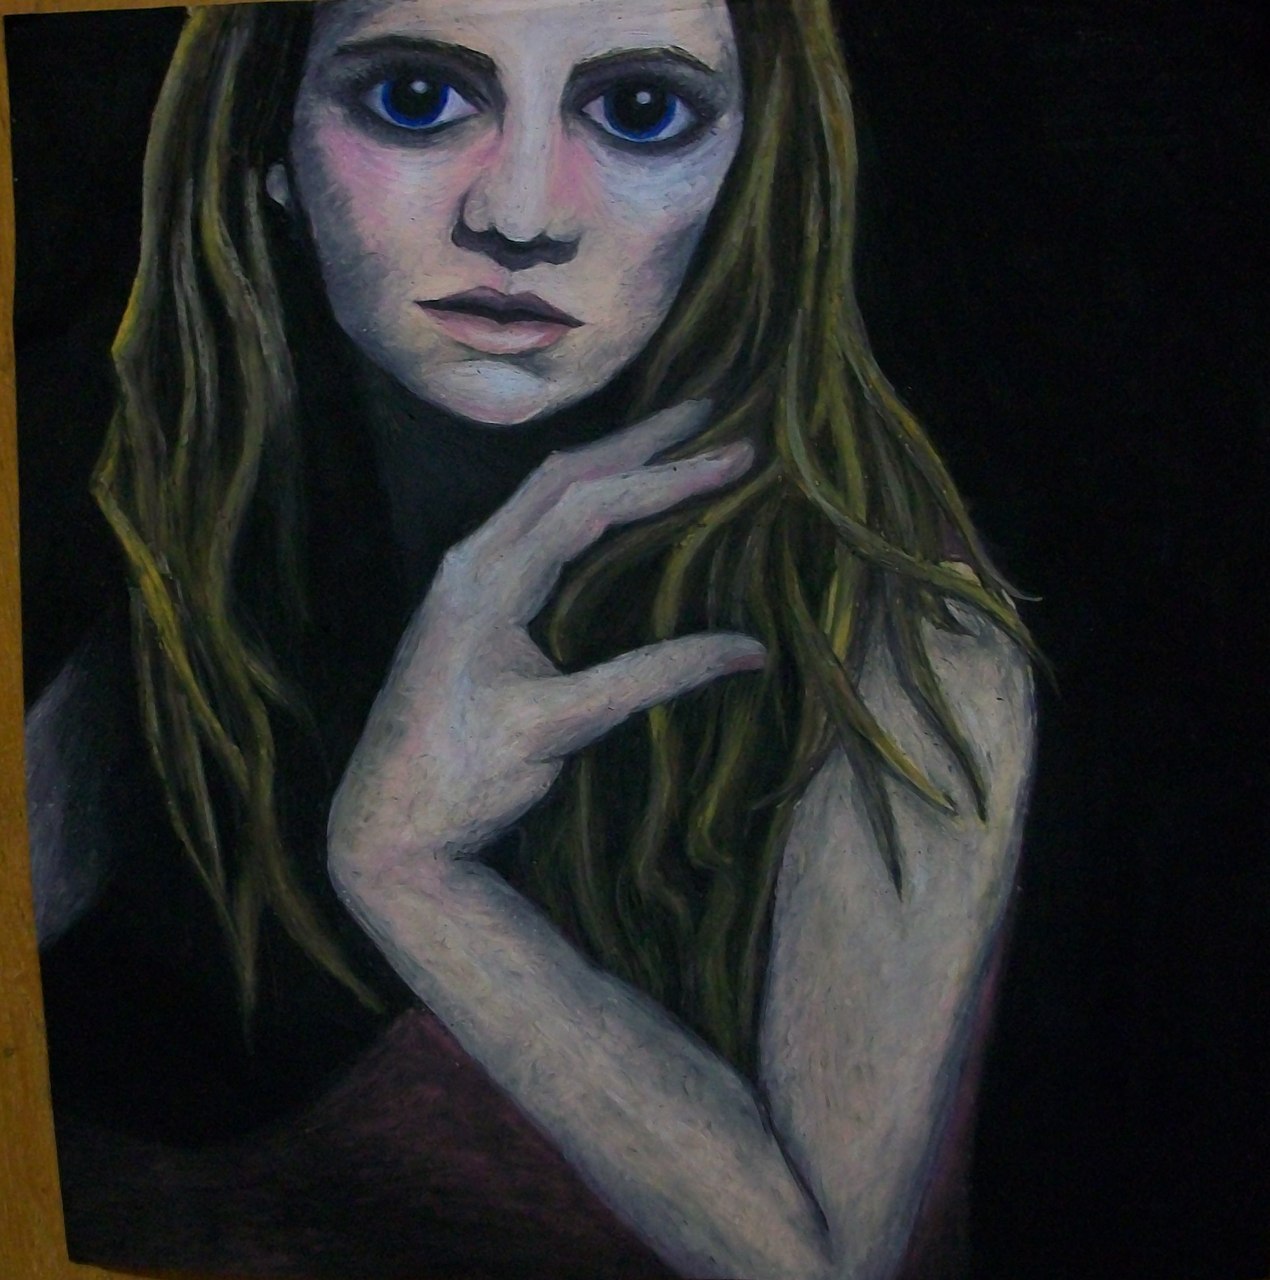 I’m still working through some problems with it. but, oil pastel. dawnofcitylights.tumblr.com